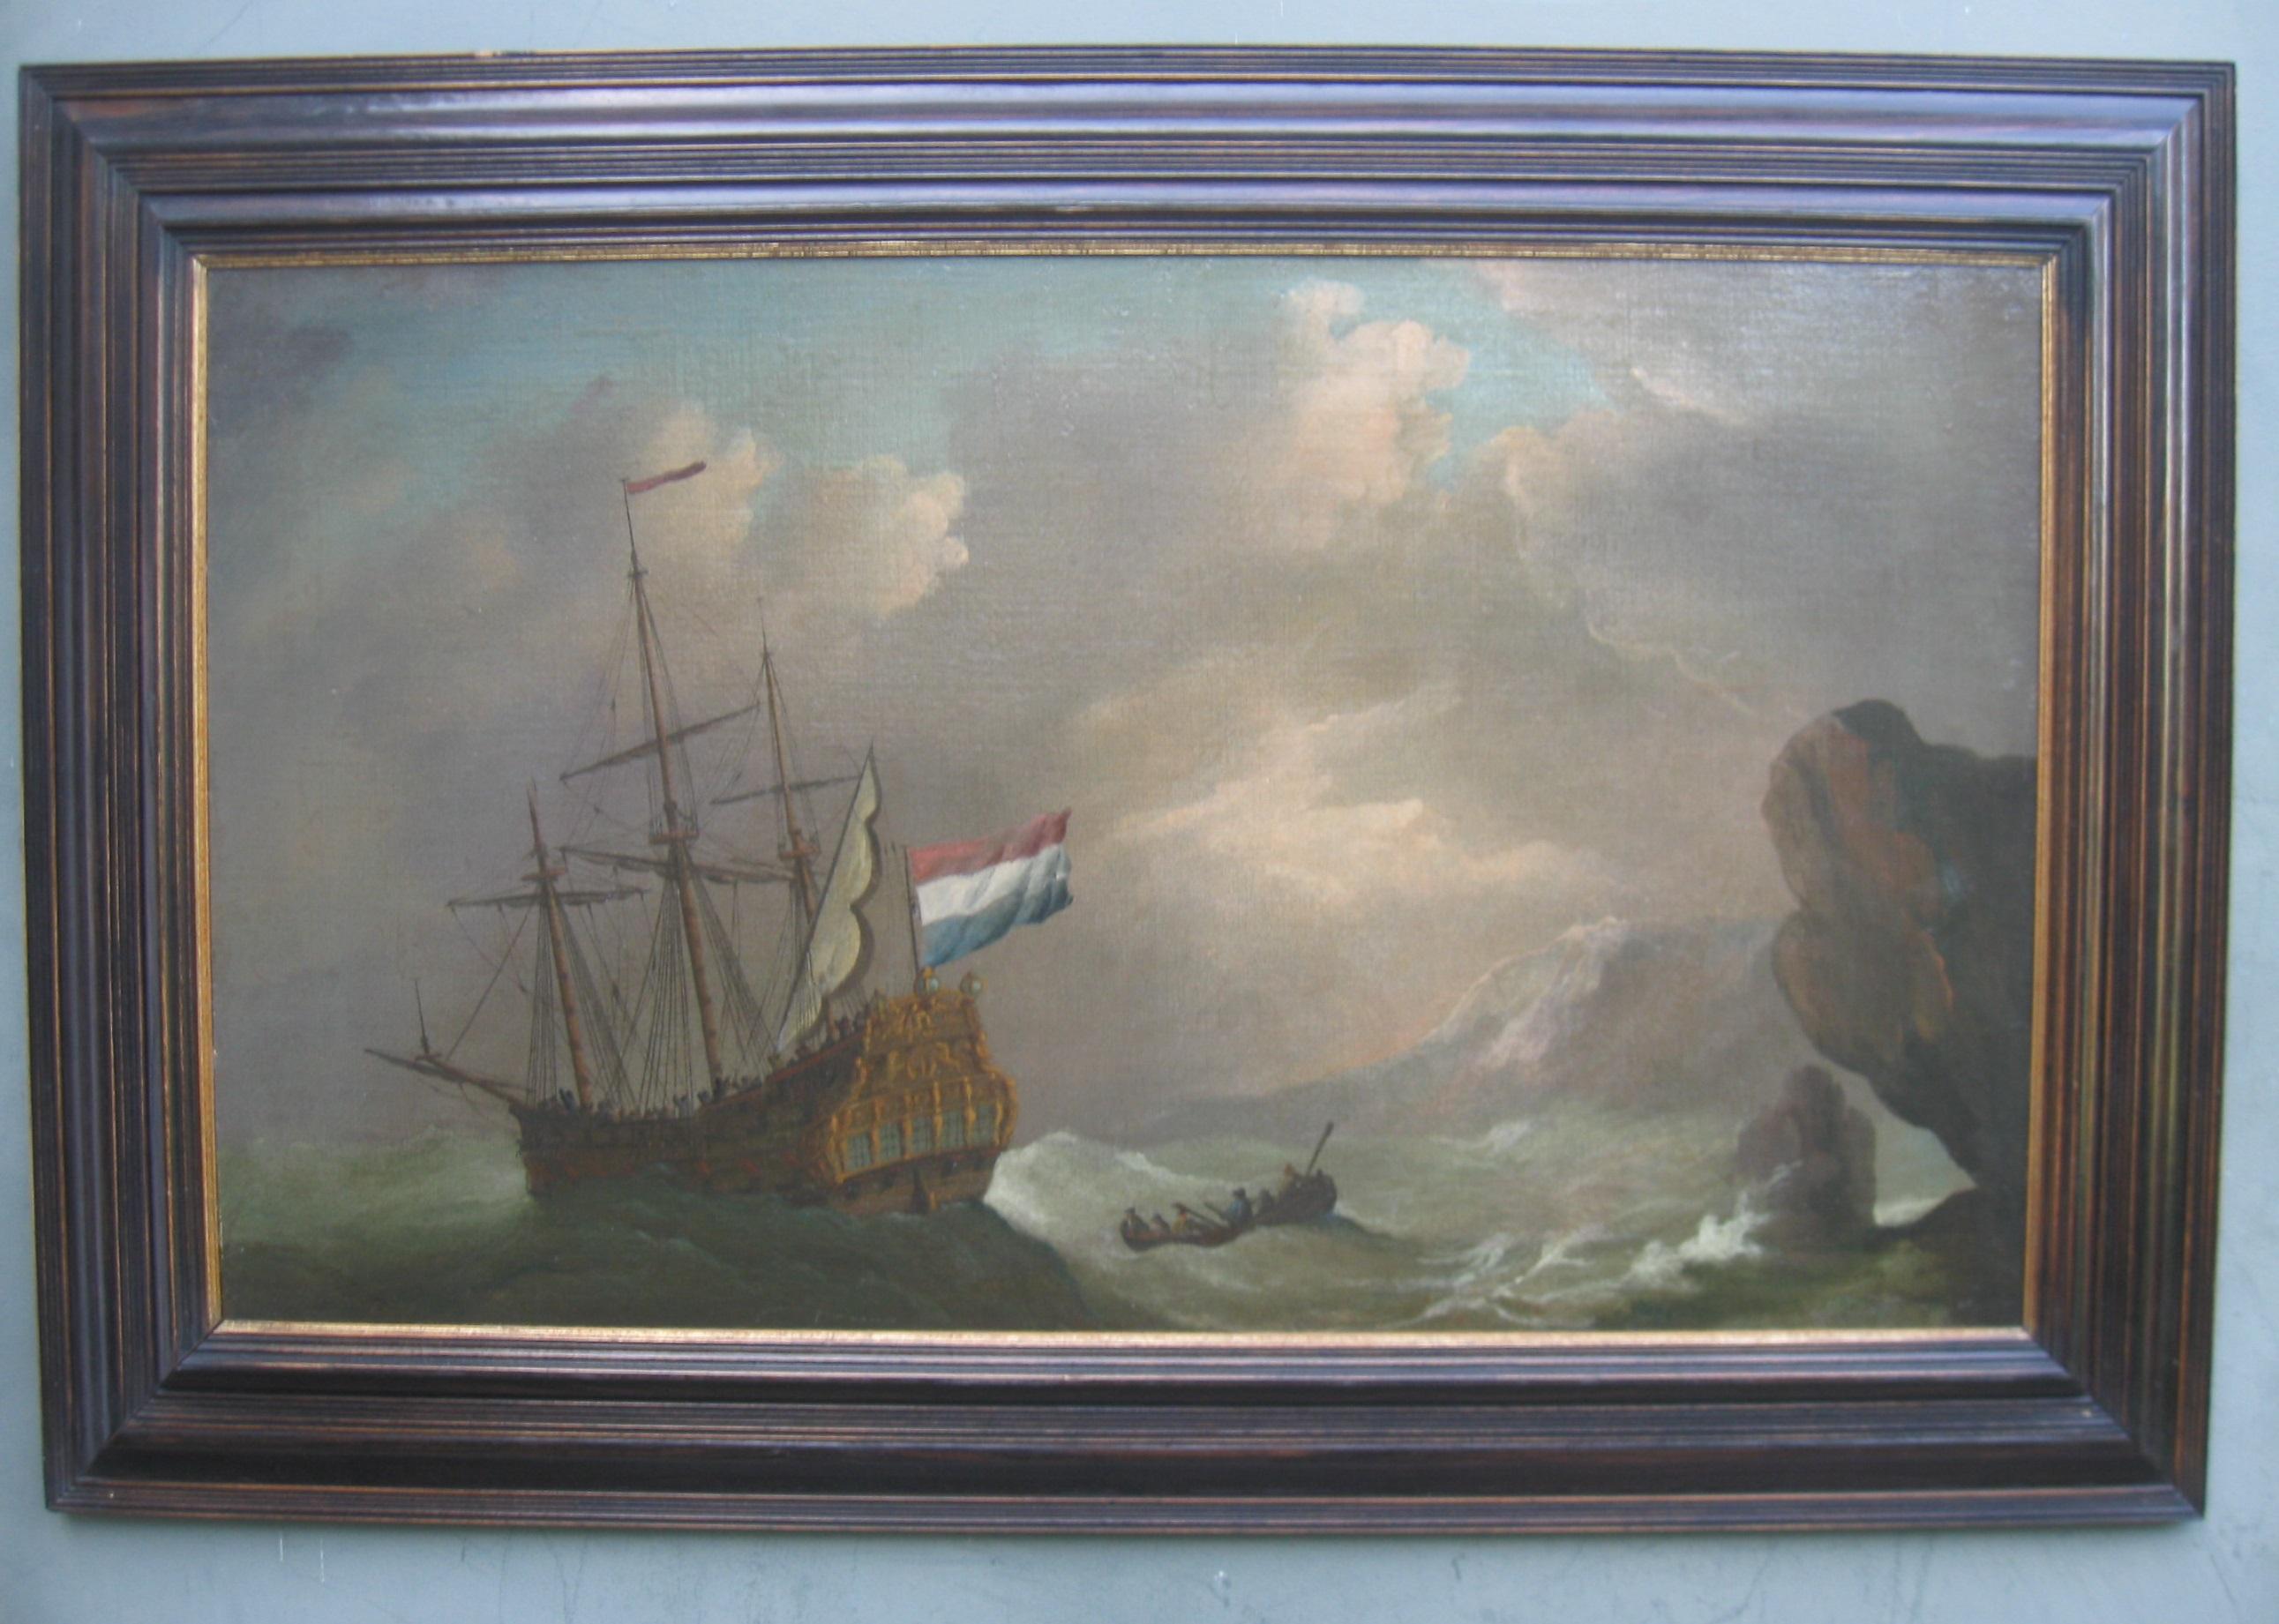 'Warship in Distress in a Storm' 17th Century Old Master Marine Seascape ci1700 - Painting by Unknown